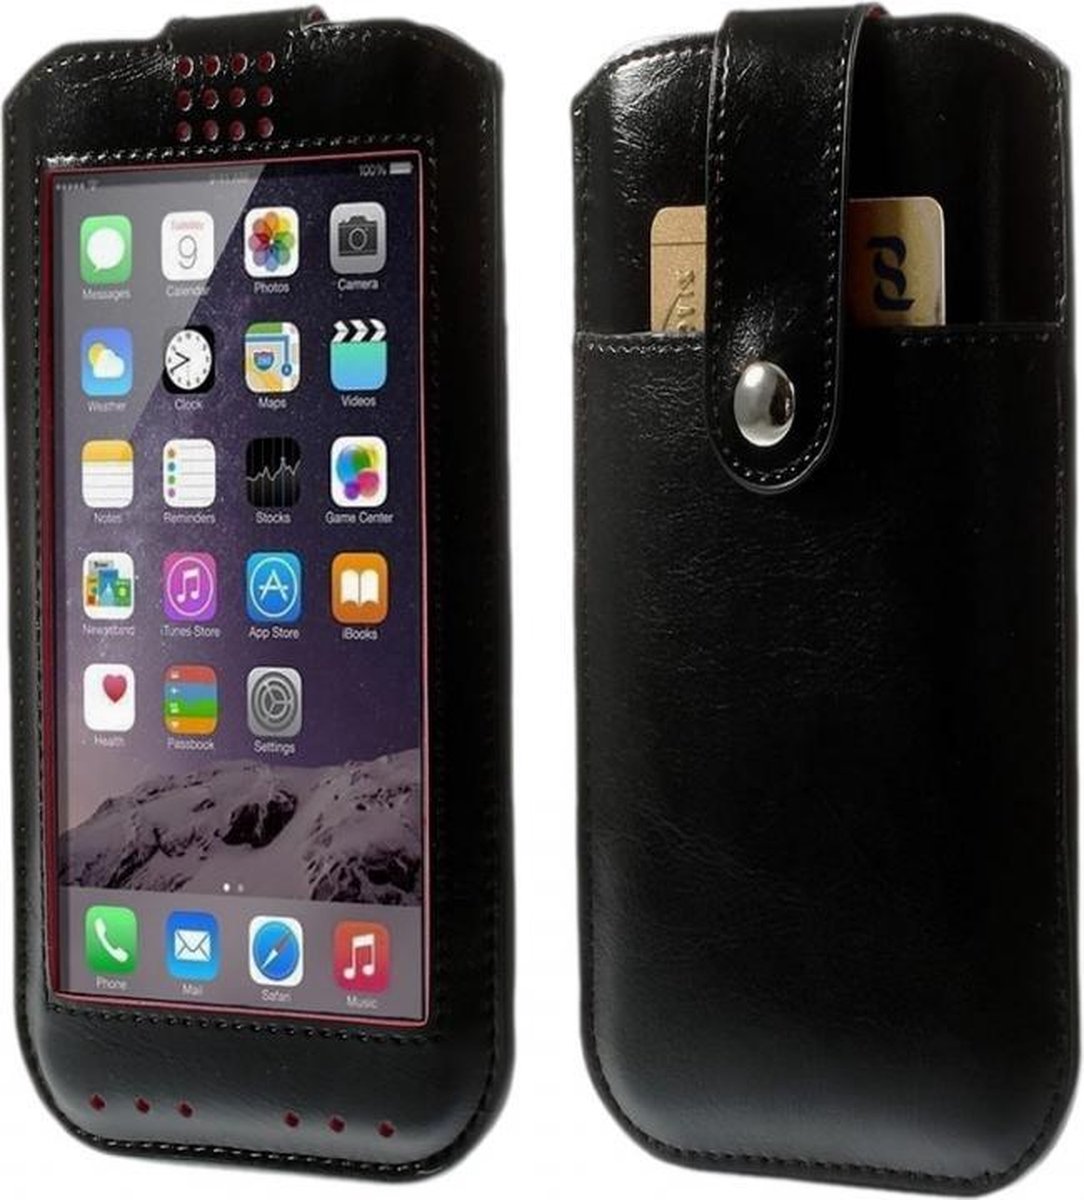 View Cover voor Lg L80 Plus, Hoes met Touch Venster, bruin , merk i12Cover